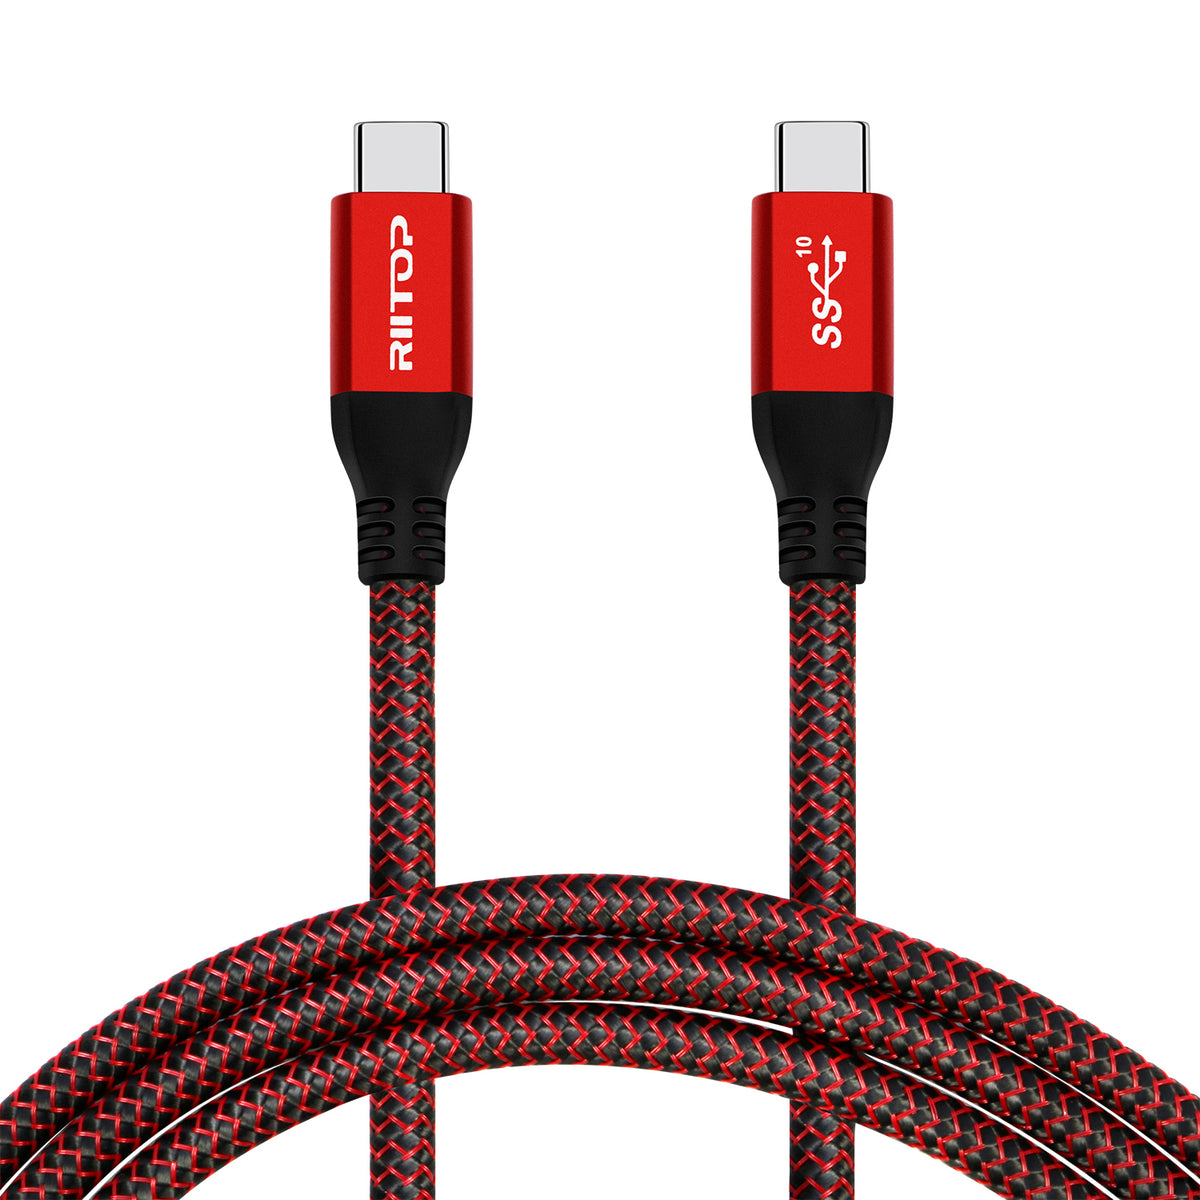 SooPii Coiled 100W USB C to USB C Cable Fast Charging 2M Nylon Braided  Type-C Cable with LED Display for lPad/lphone/MacBook